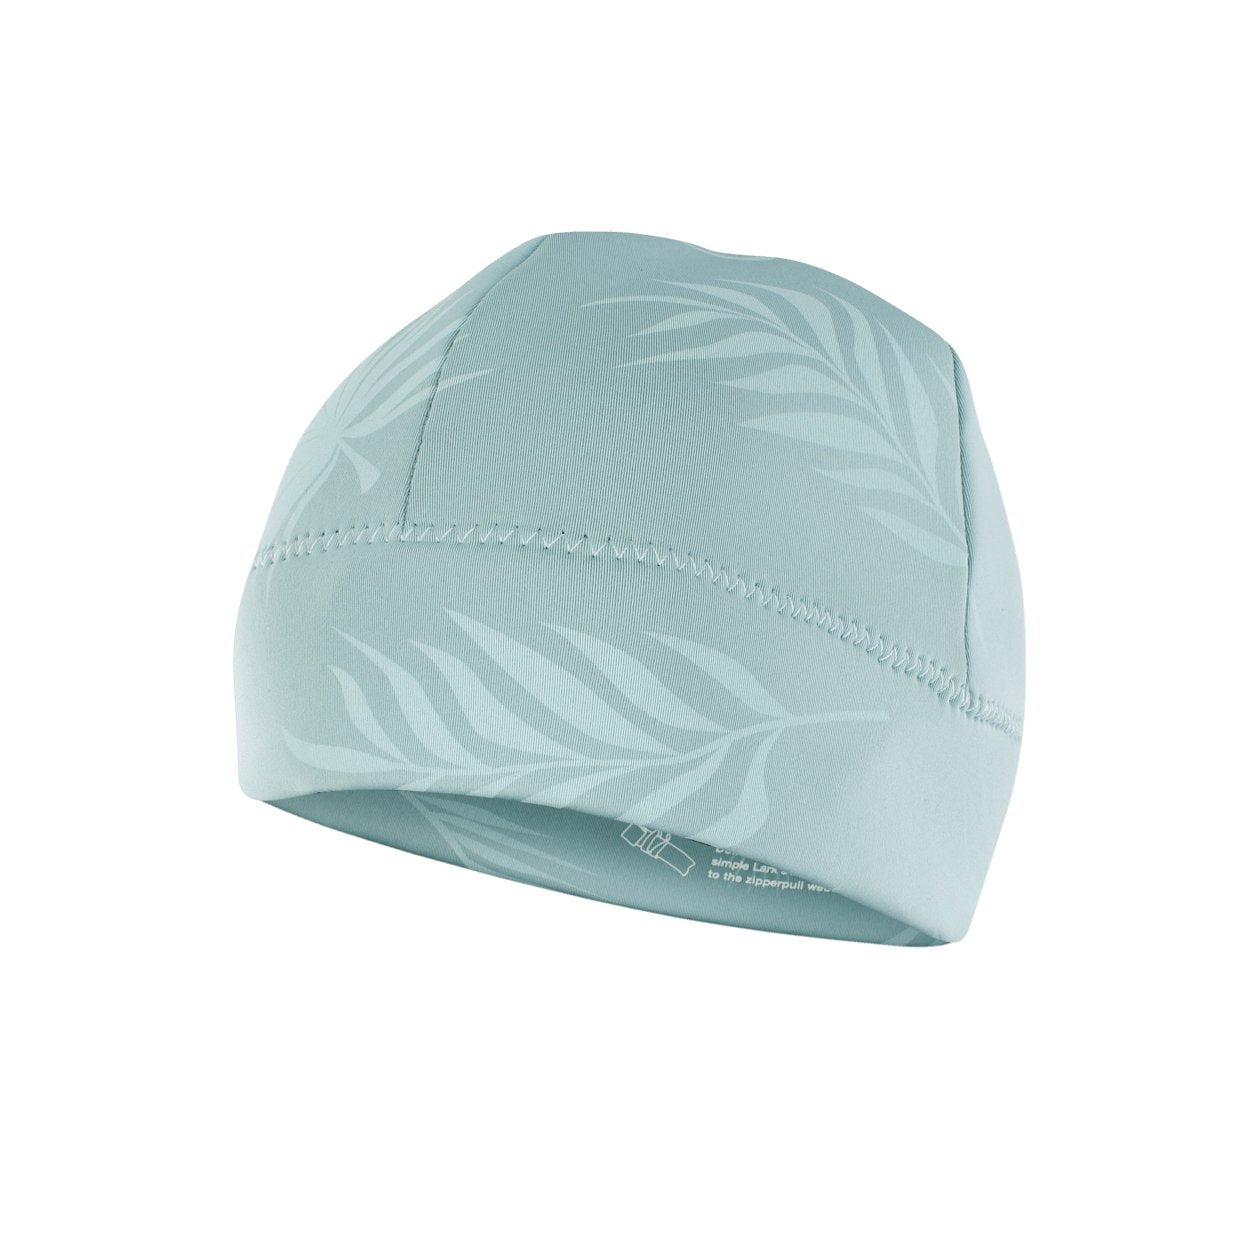 ION Neo Grace Beanie 2022 - Worthing Watersports - 9010583053851 - Neo Accessories - ION Water